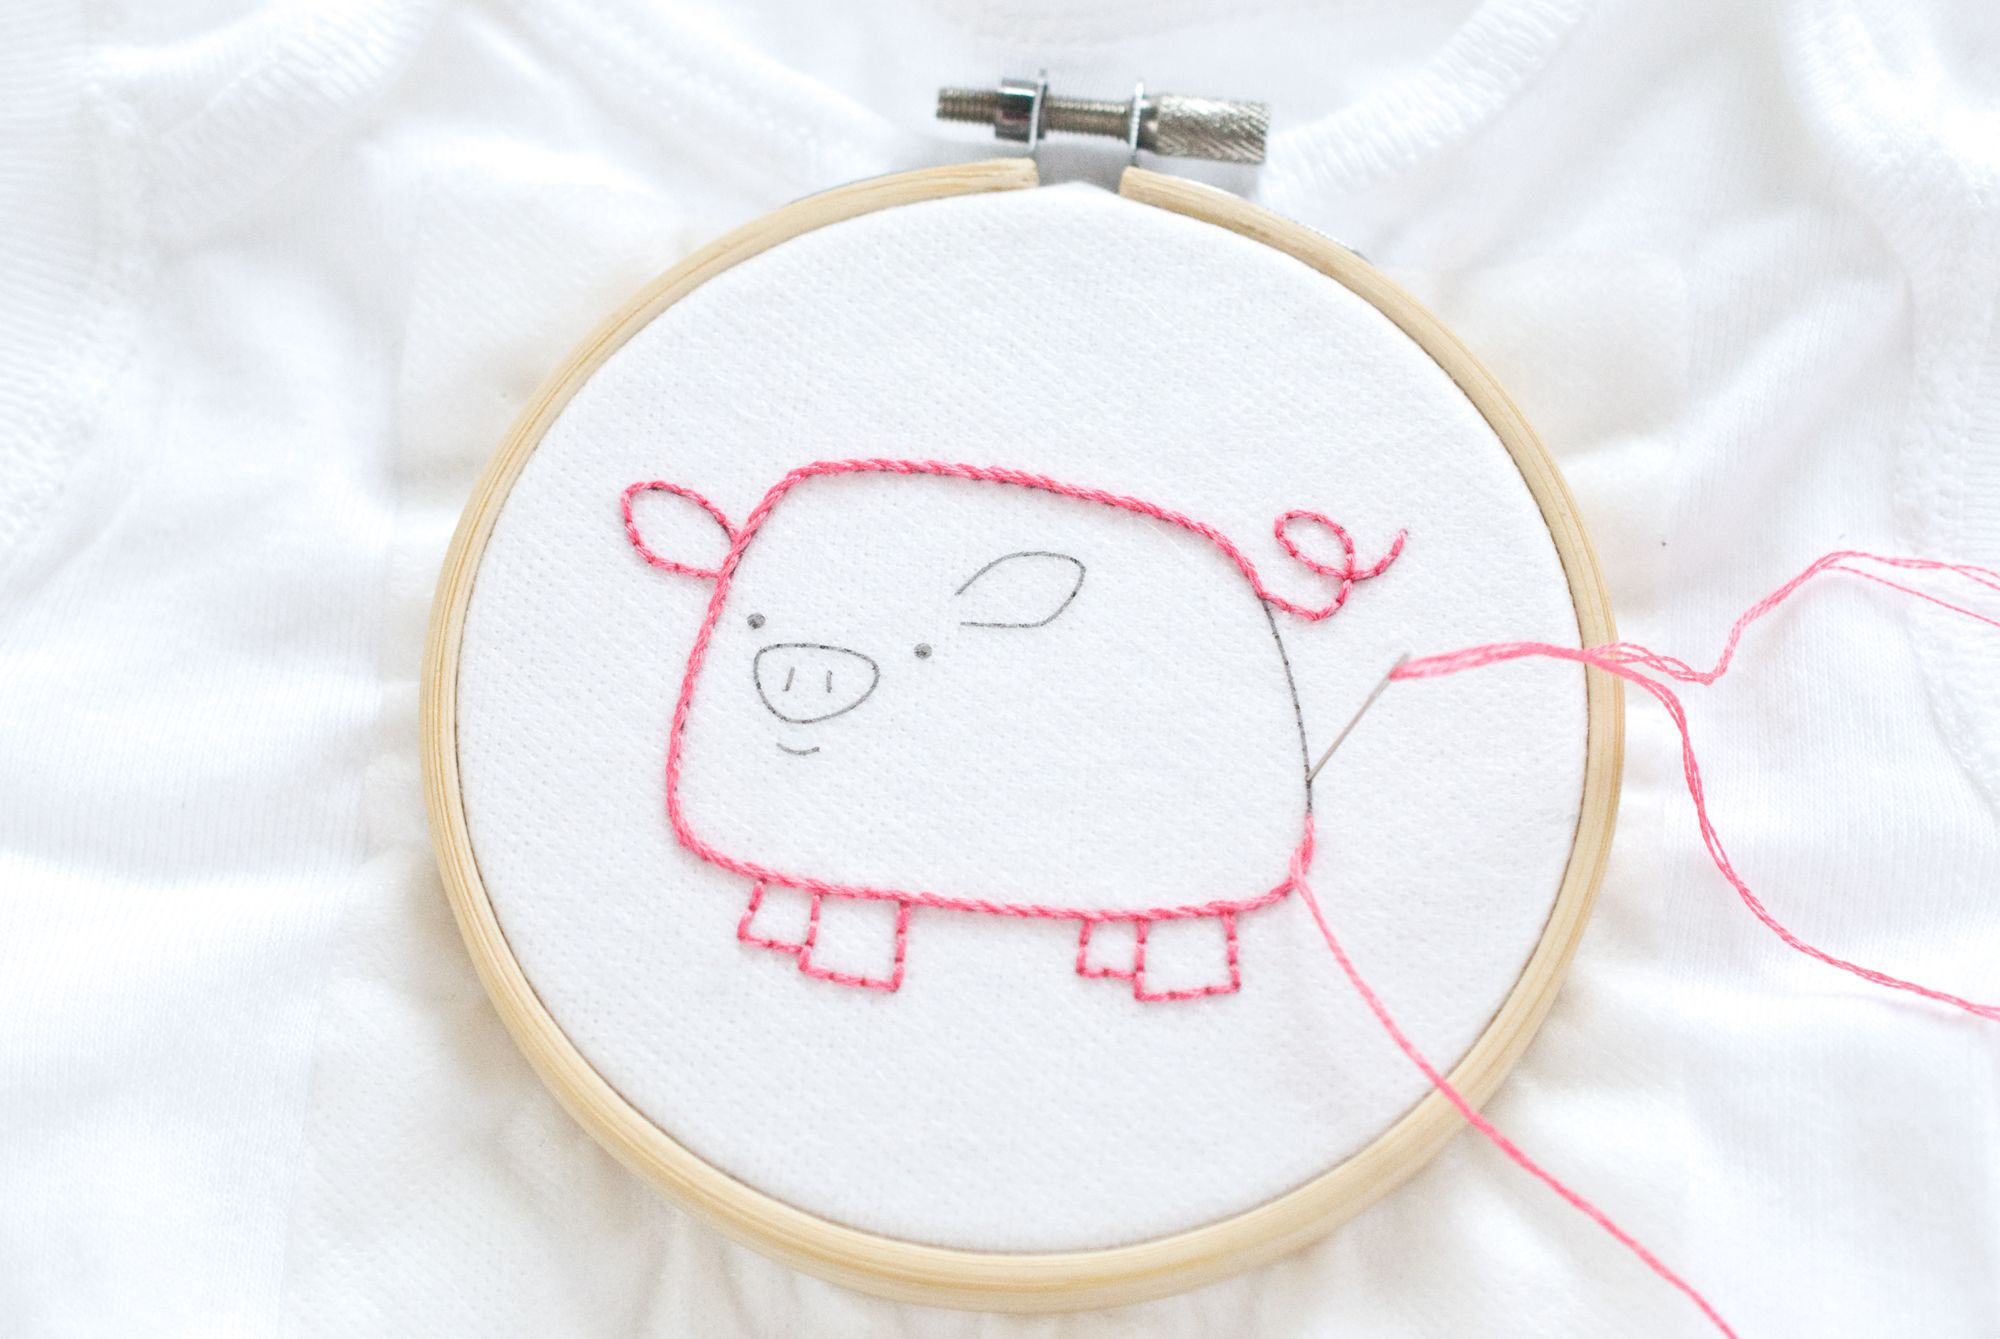 Funky Embroidery Patterns How To Hand Embroider On T Shirts